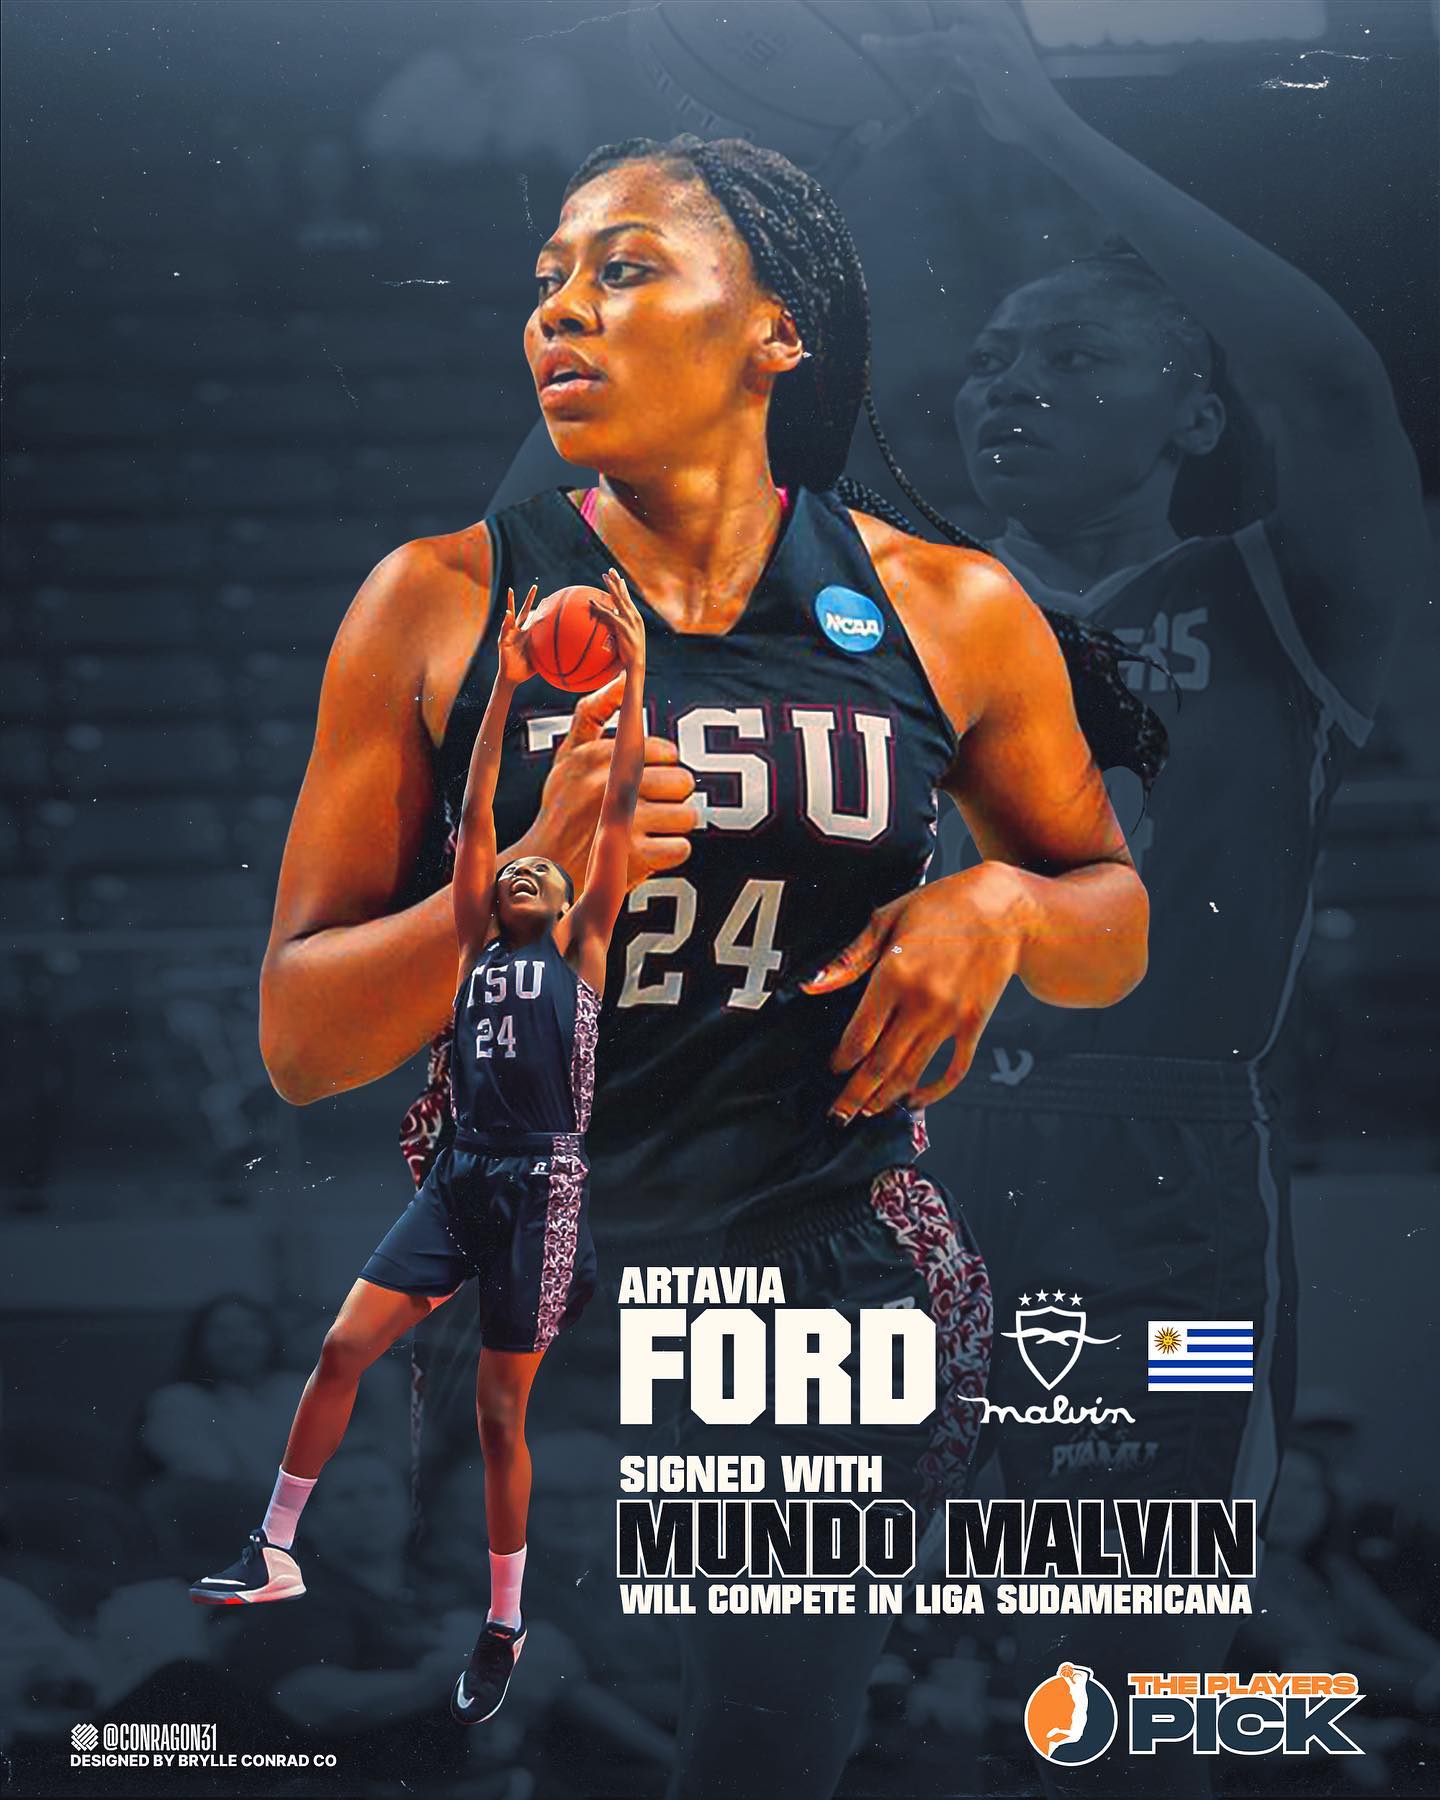 Artavia Ford signed with Malvin!